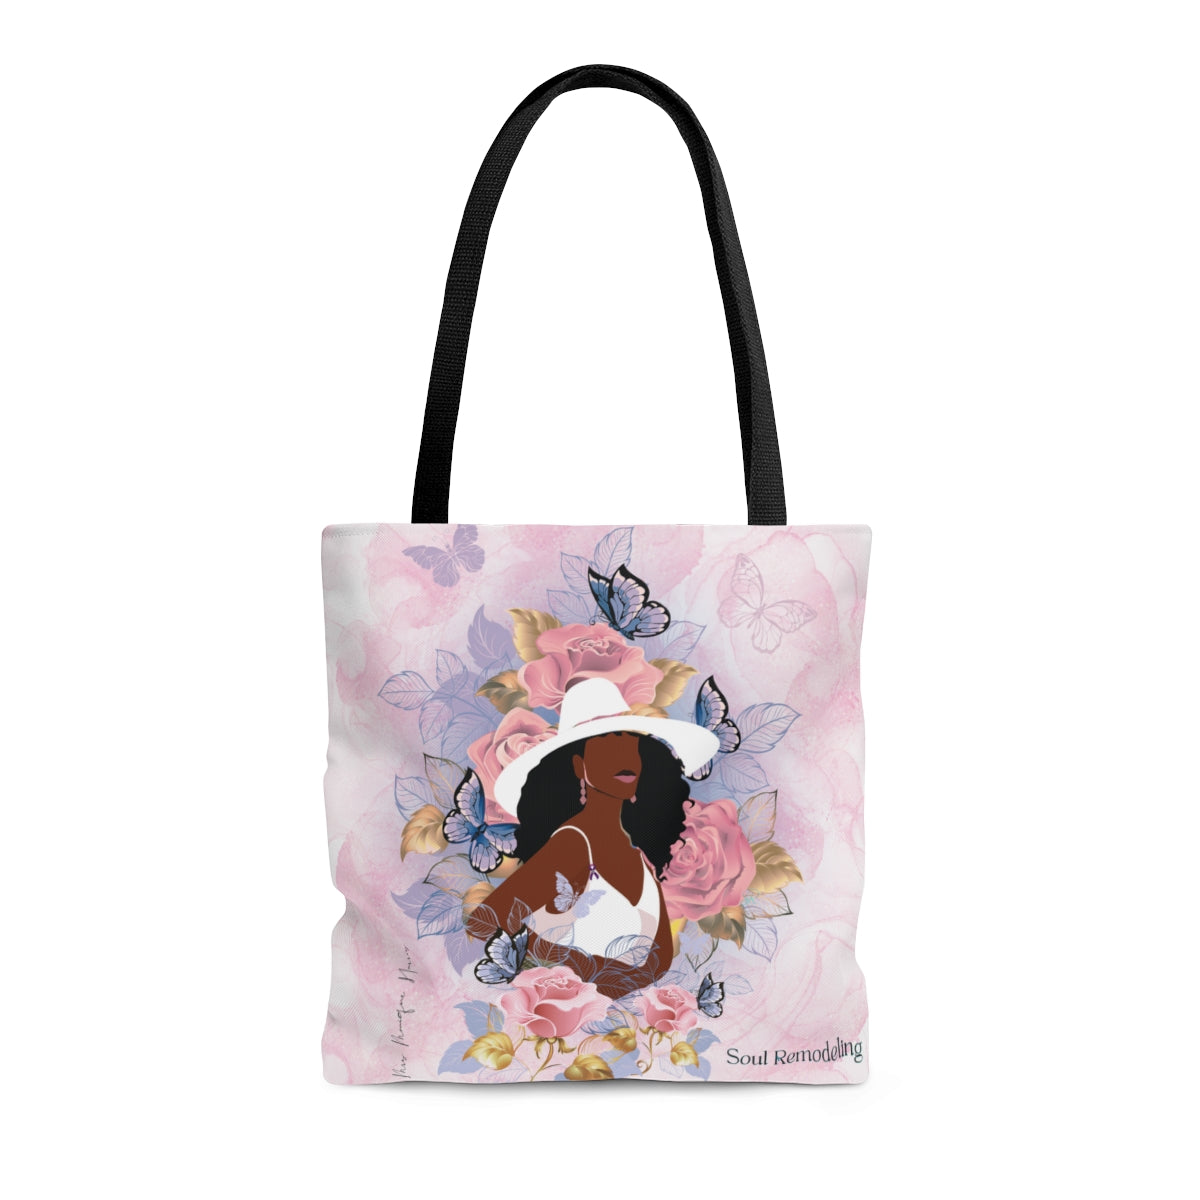 "I Am Chosen by God" (Queen) Tote Bag